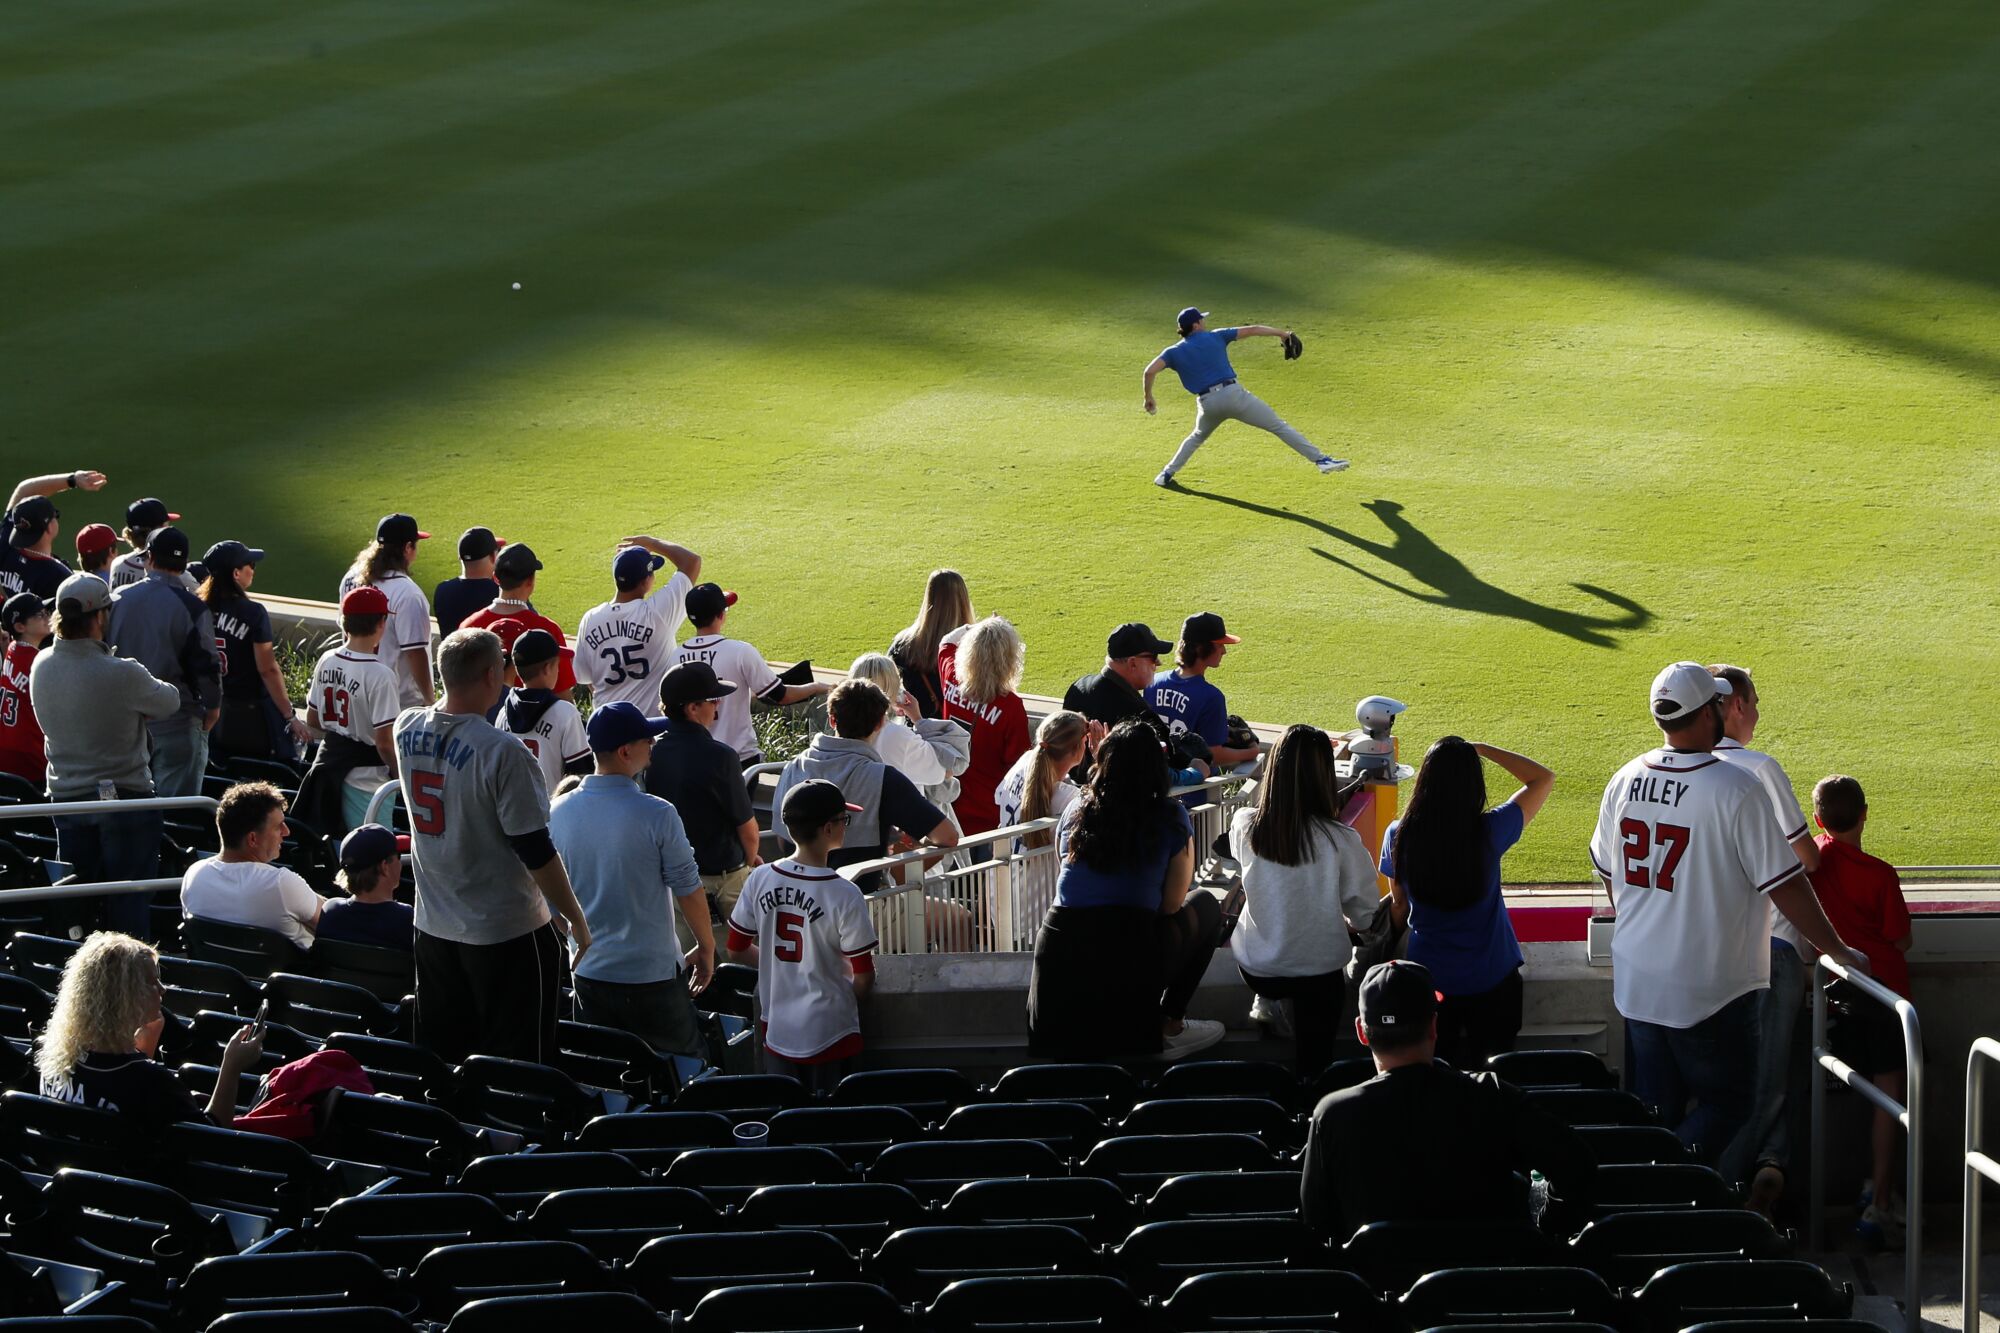 Fans watch Los Angeles Dodgers relief pitcher Alex Vesia warm up in the outfield.